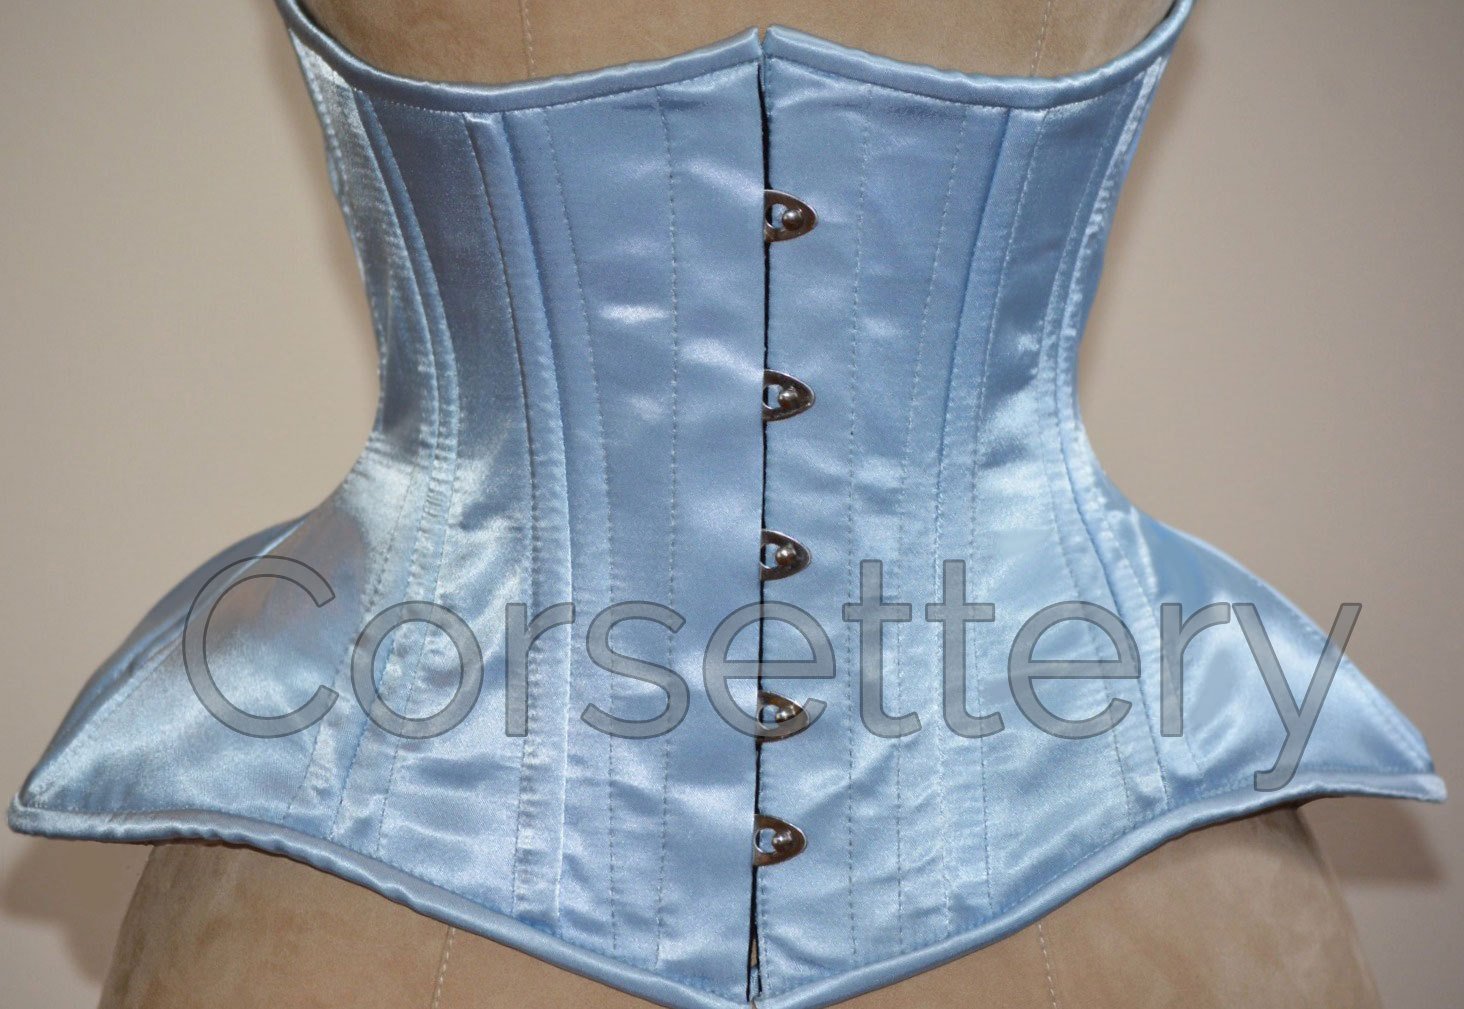 Real Steel Boned Underbust Underwear Corset From Transparent Mesh and  Cotton. Real Waist Training Corset for Tight Lacing. 